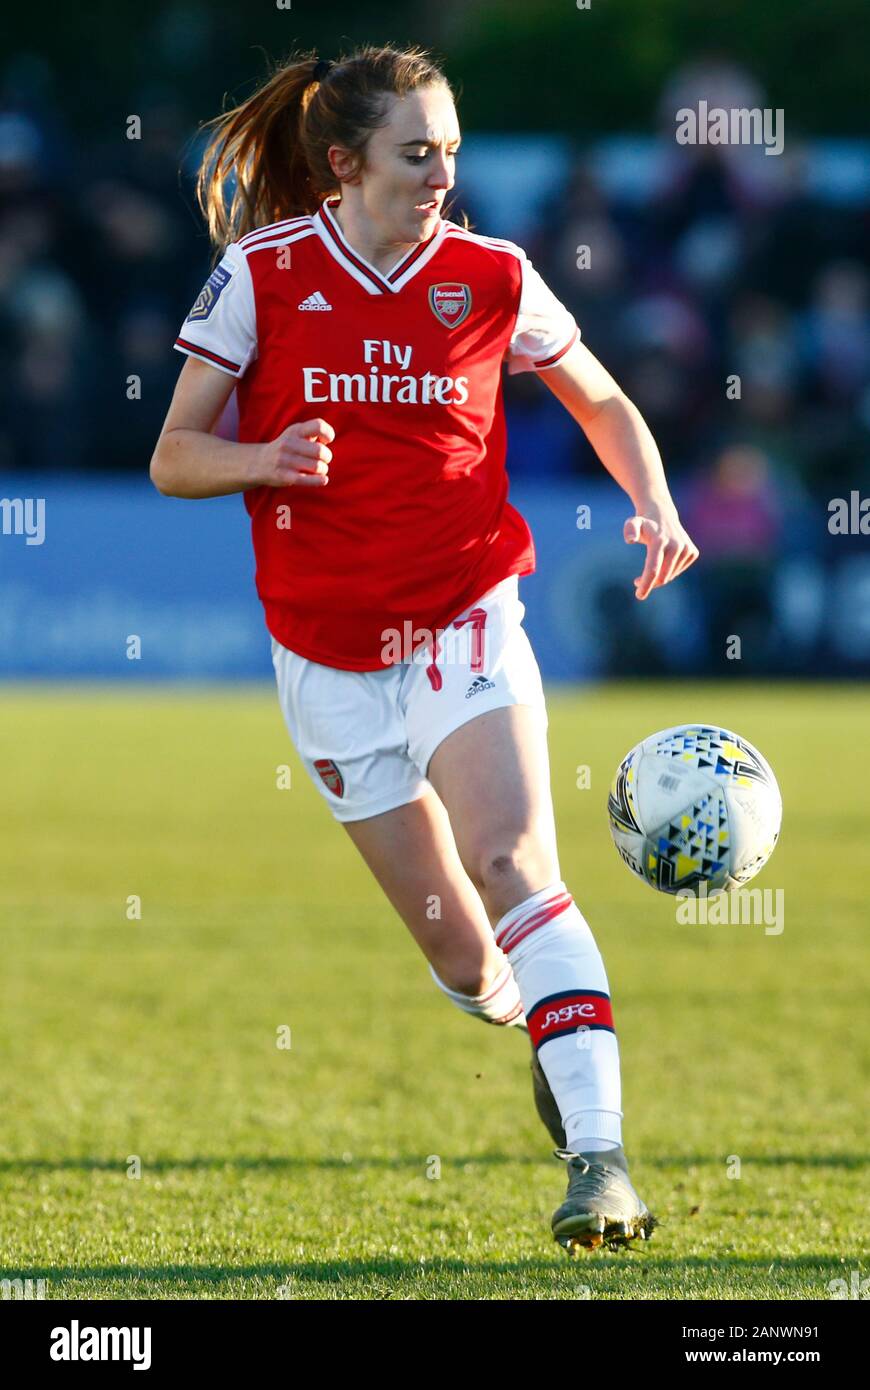 Lisa Evans of Arsenal during Barclays Women's Super League match between Arsenal Women and Chelsea Women at Meadow Park Stadium on January 19, 2020 in Borehamwood, England (Photo by AFS/Espa-Images) Stock Photo